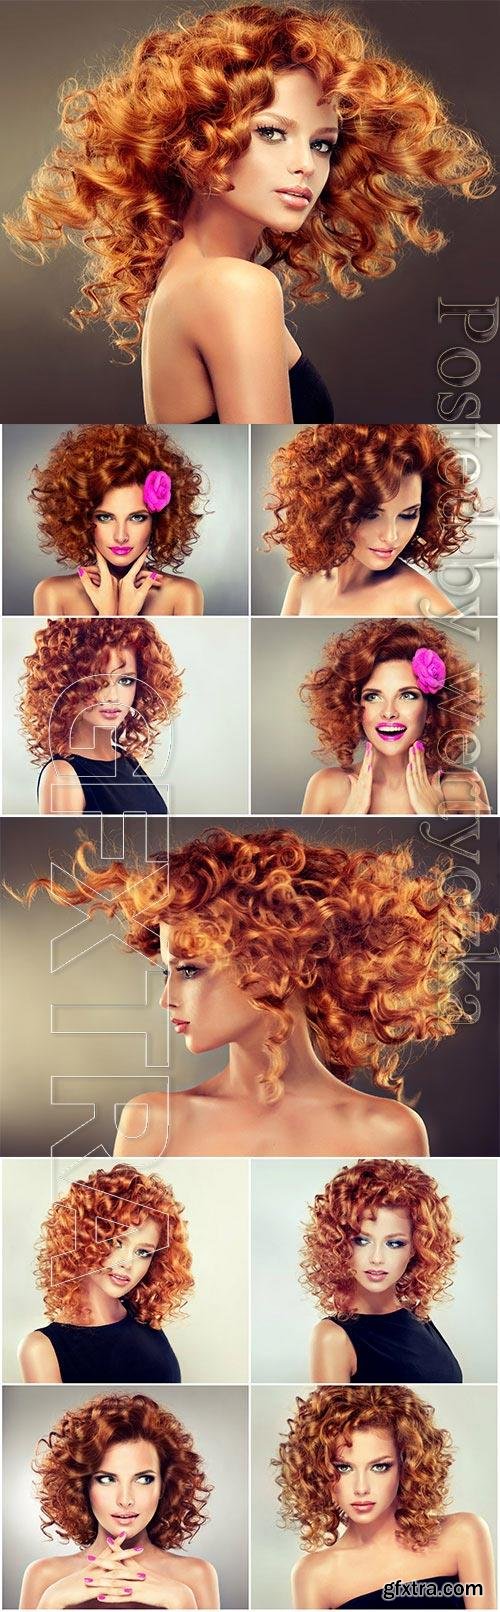 Fiery red hair of a beautiful girl stock photo